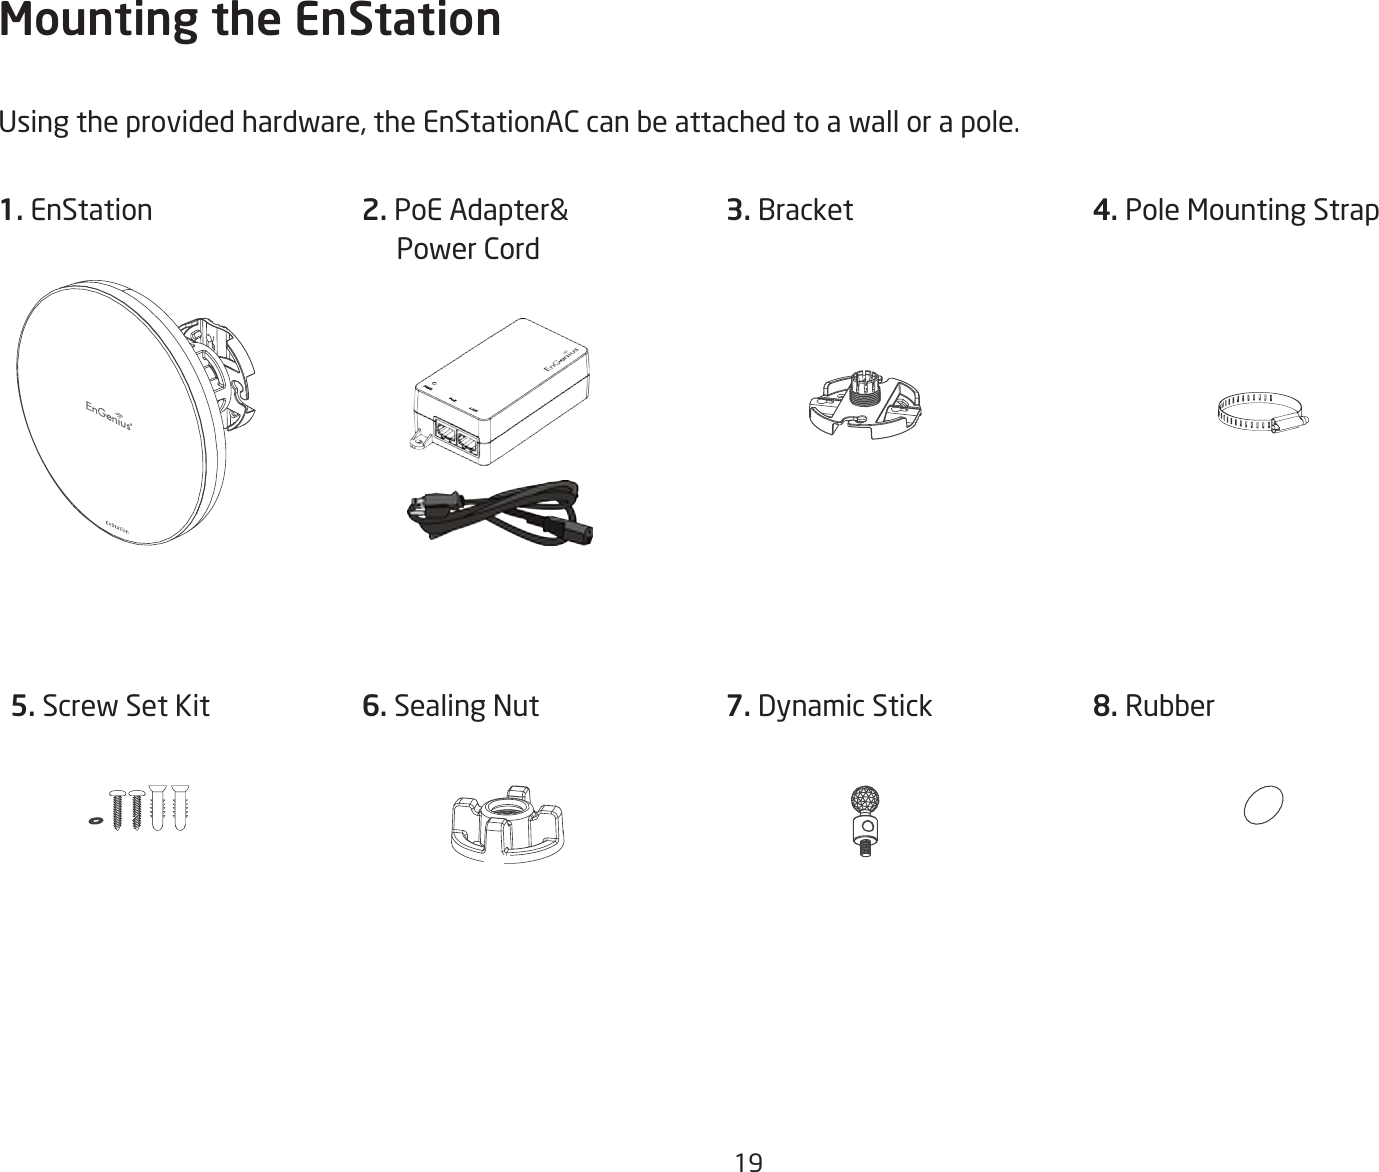 19Mounting the EnStationUsingtheprovidedhardware,theEnStationACcanbeattachedtoawallorapole.1. EnStation 3. Bracket 5. Screw Set Kit 6. Sealing Nut4. Pole Mounting Strap 7. Dynamic Stick 8. Rubber2. PoEAdapter&amp;     Power Cord